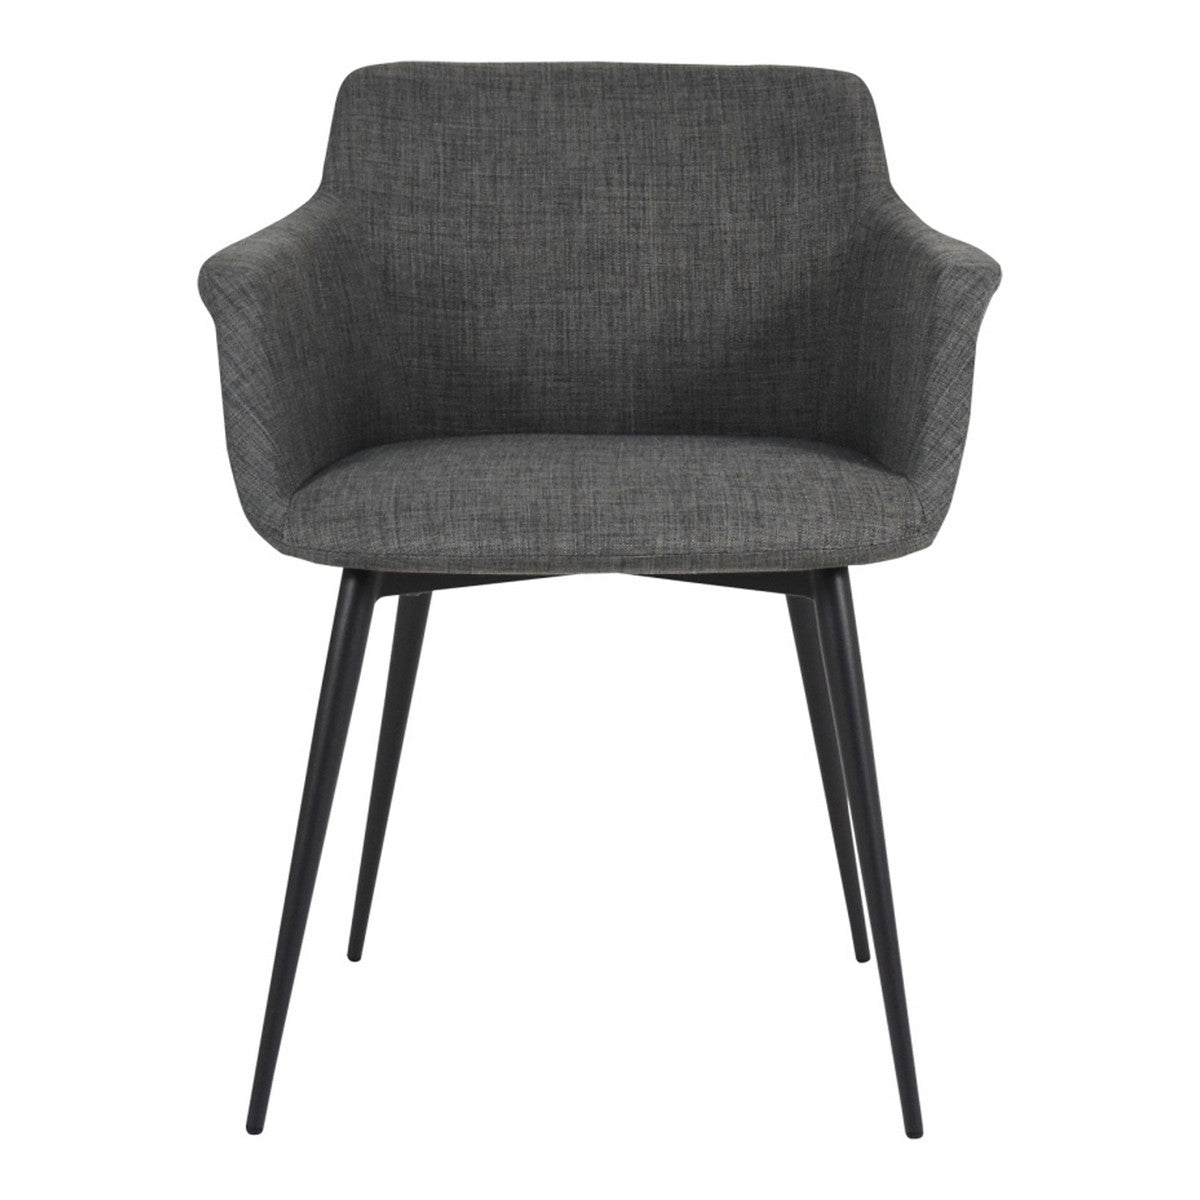 Moe's Home Collection Ronda Arm Chair Grey-Set of Two - EJ-1016-25 - Moe's Home Collection - Dining Chairs - Minimal And Modern - 1